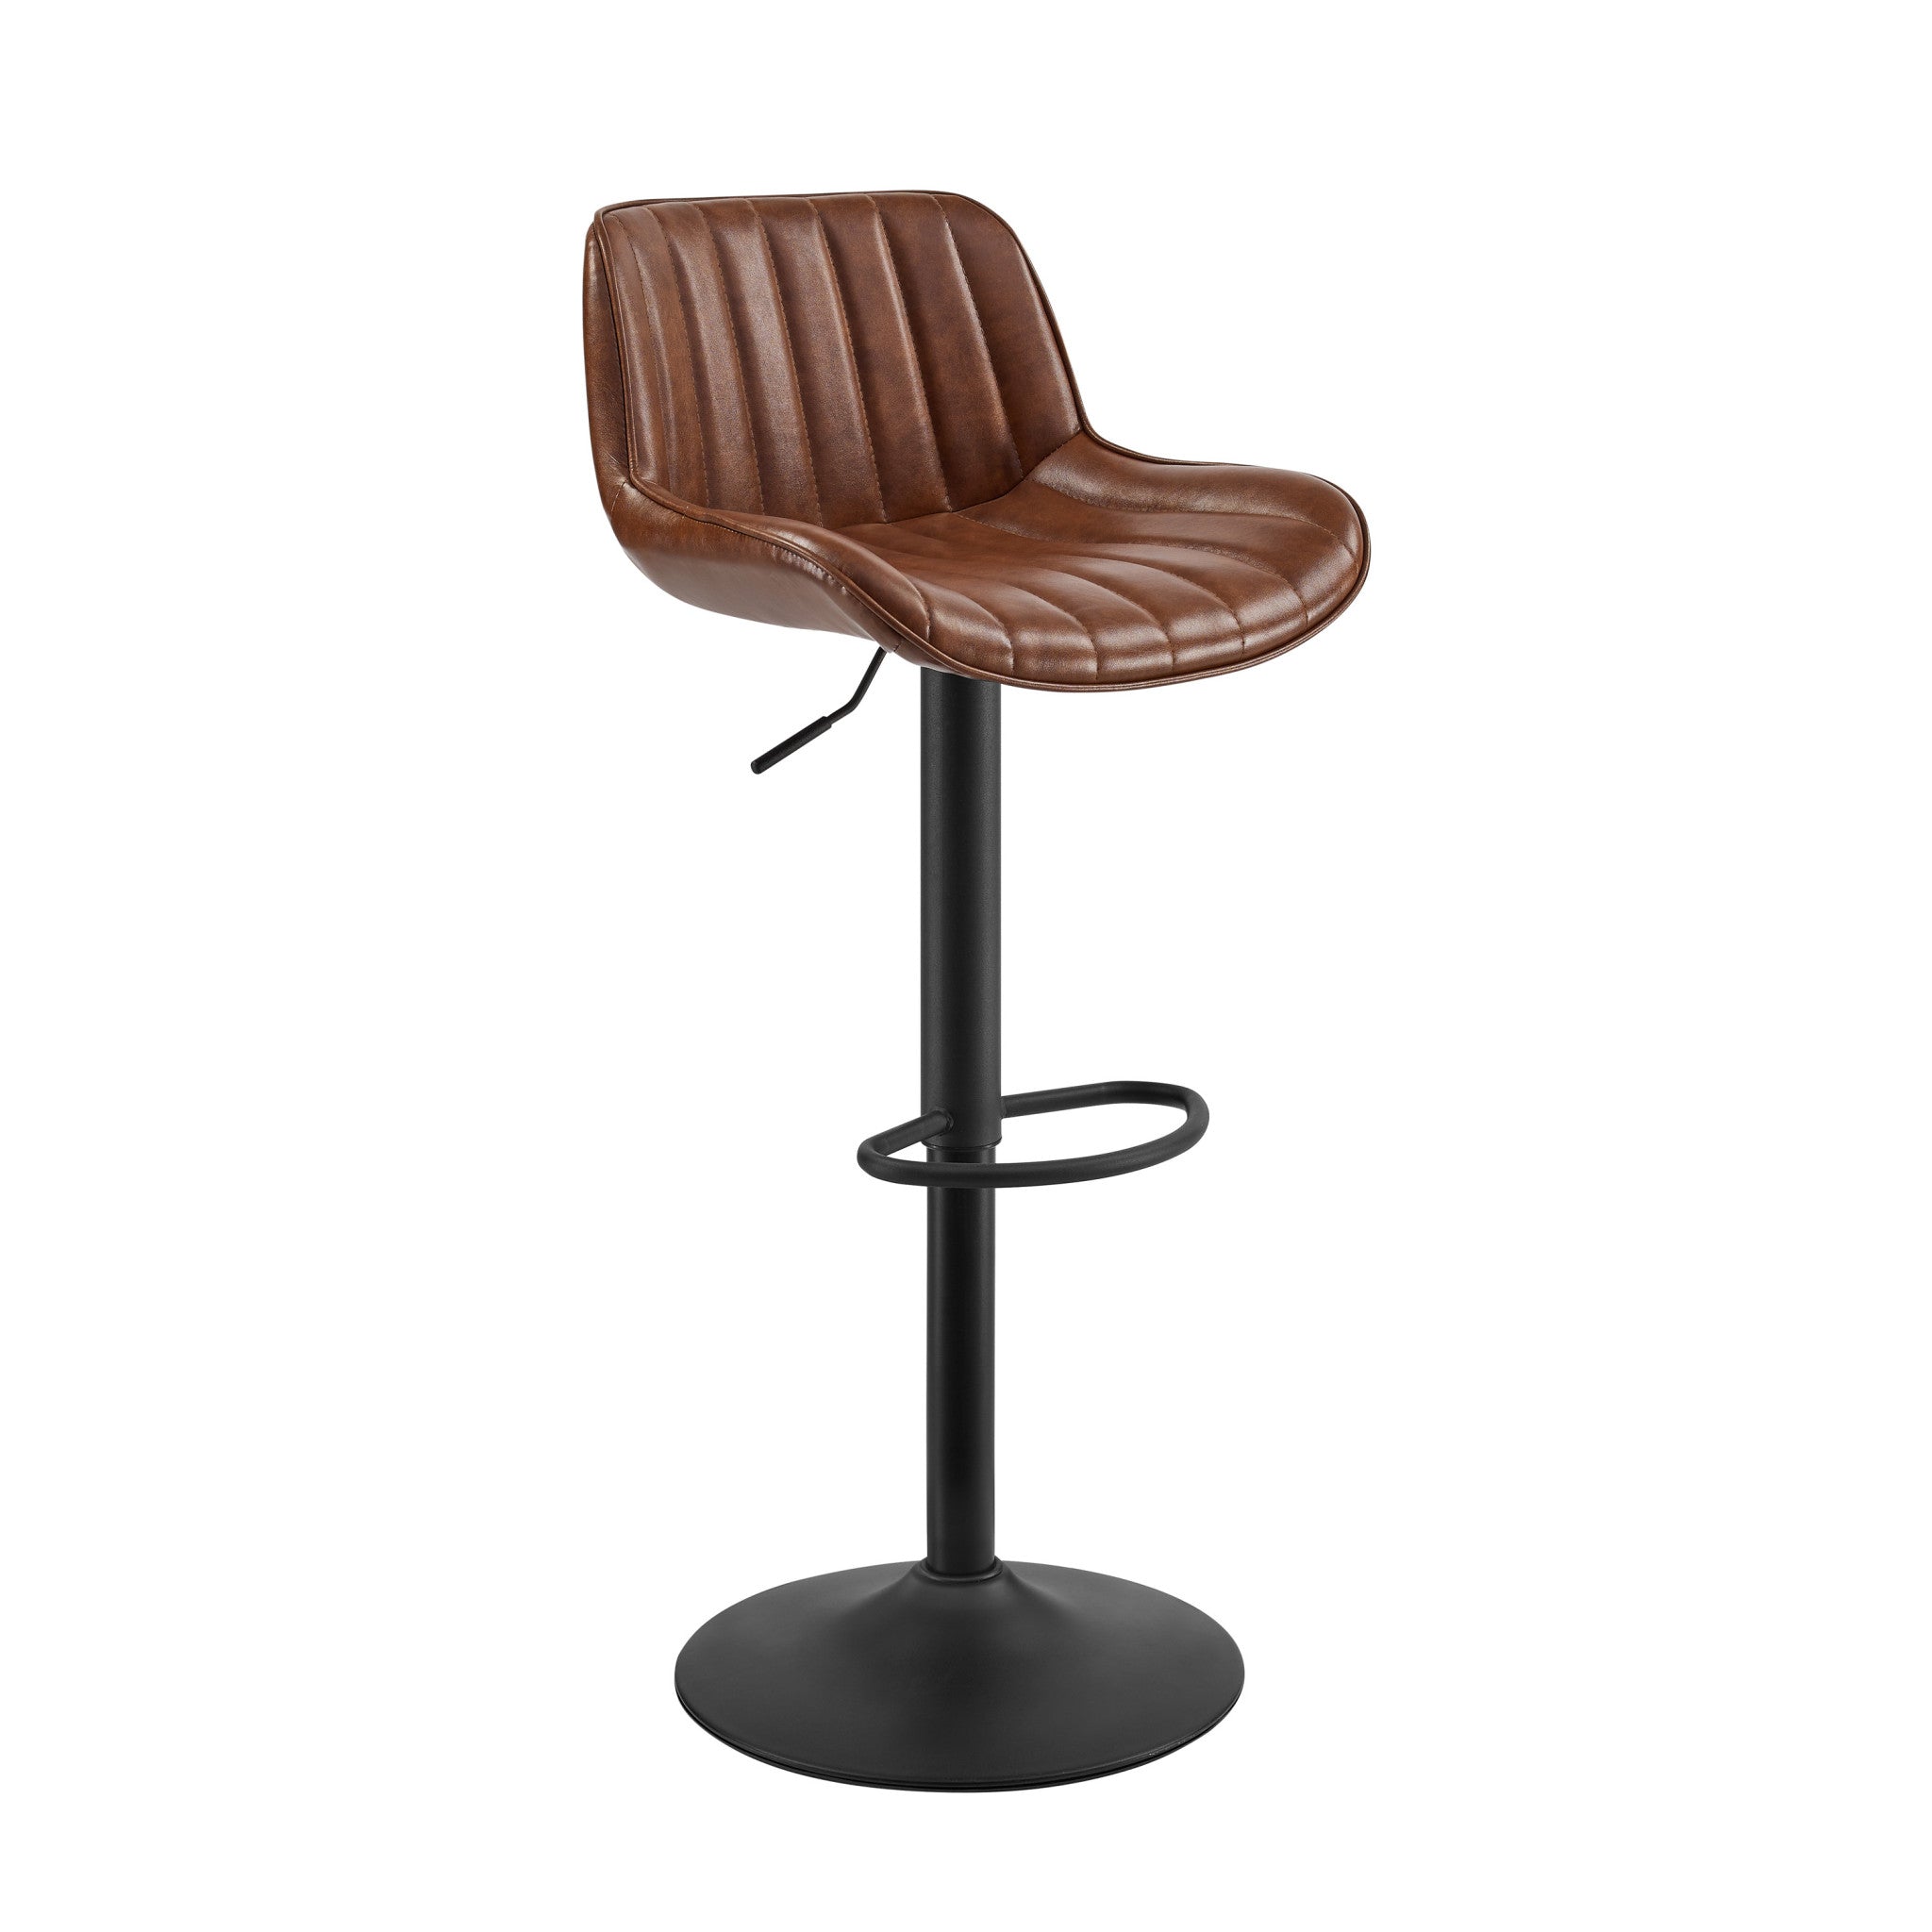 Set of Two 31" Brown And Black Faux Leather And Steel Swivel Low Back Adjustable Height Bar Chairs